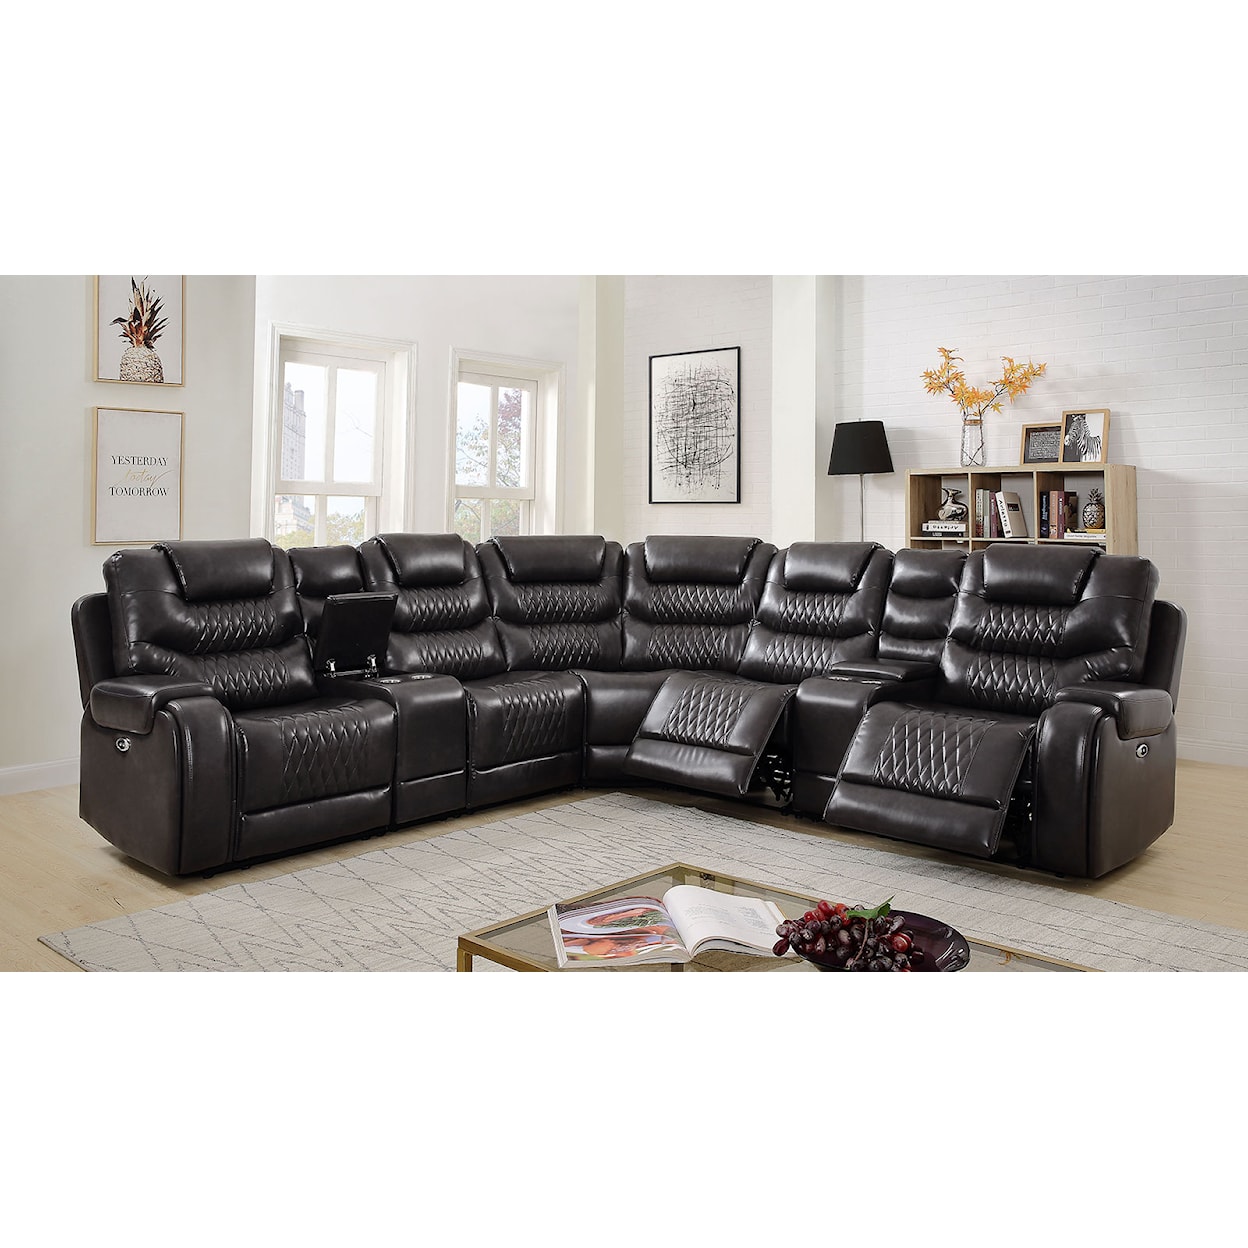 Furniture of America Mariah Upholstery Power Sectional